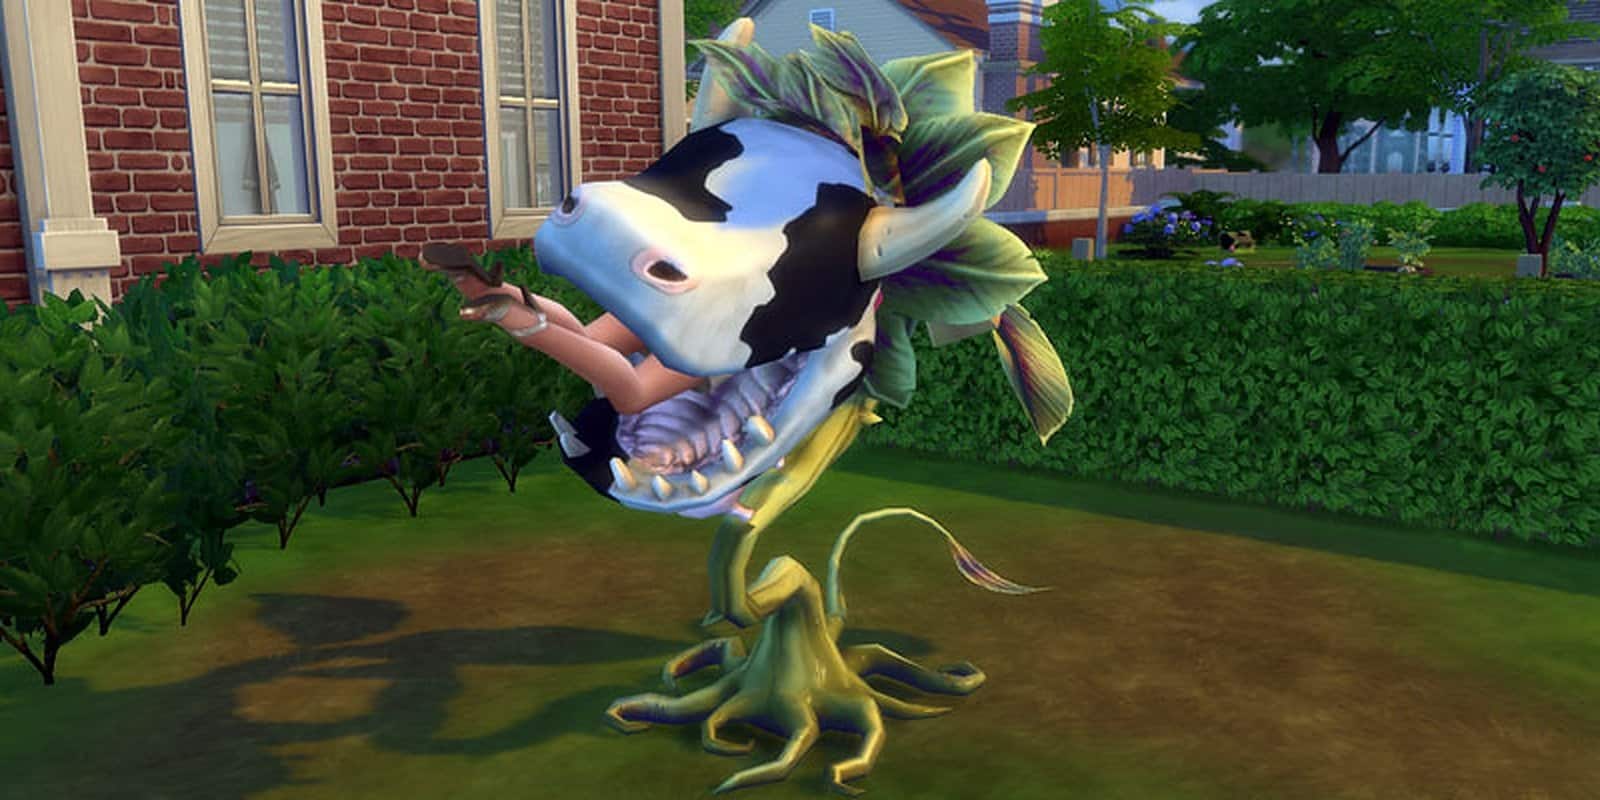 A Cowplant is eating a Sim in The Sims 4.